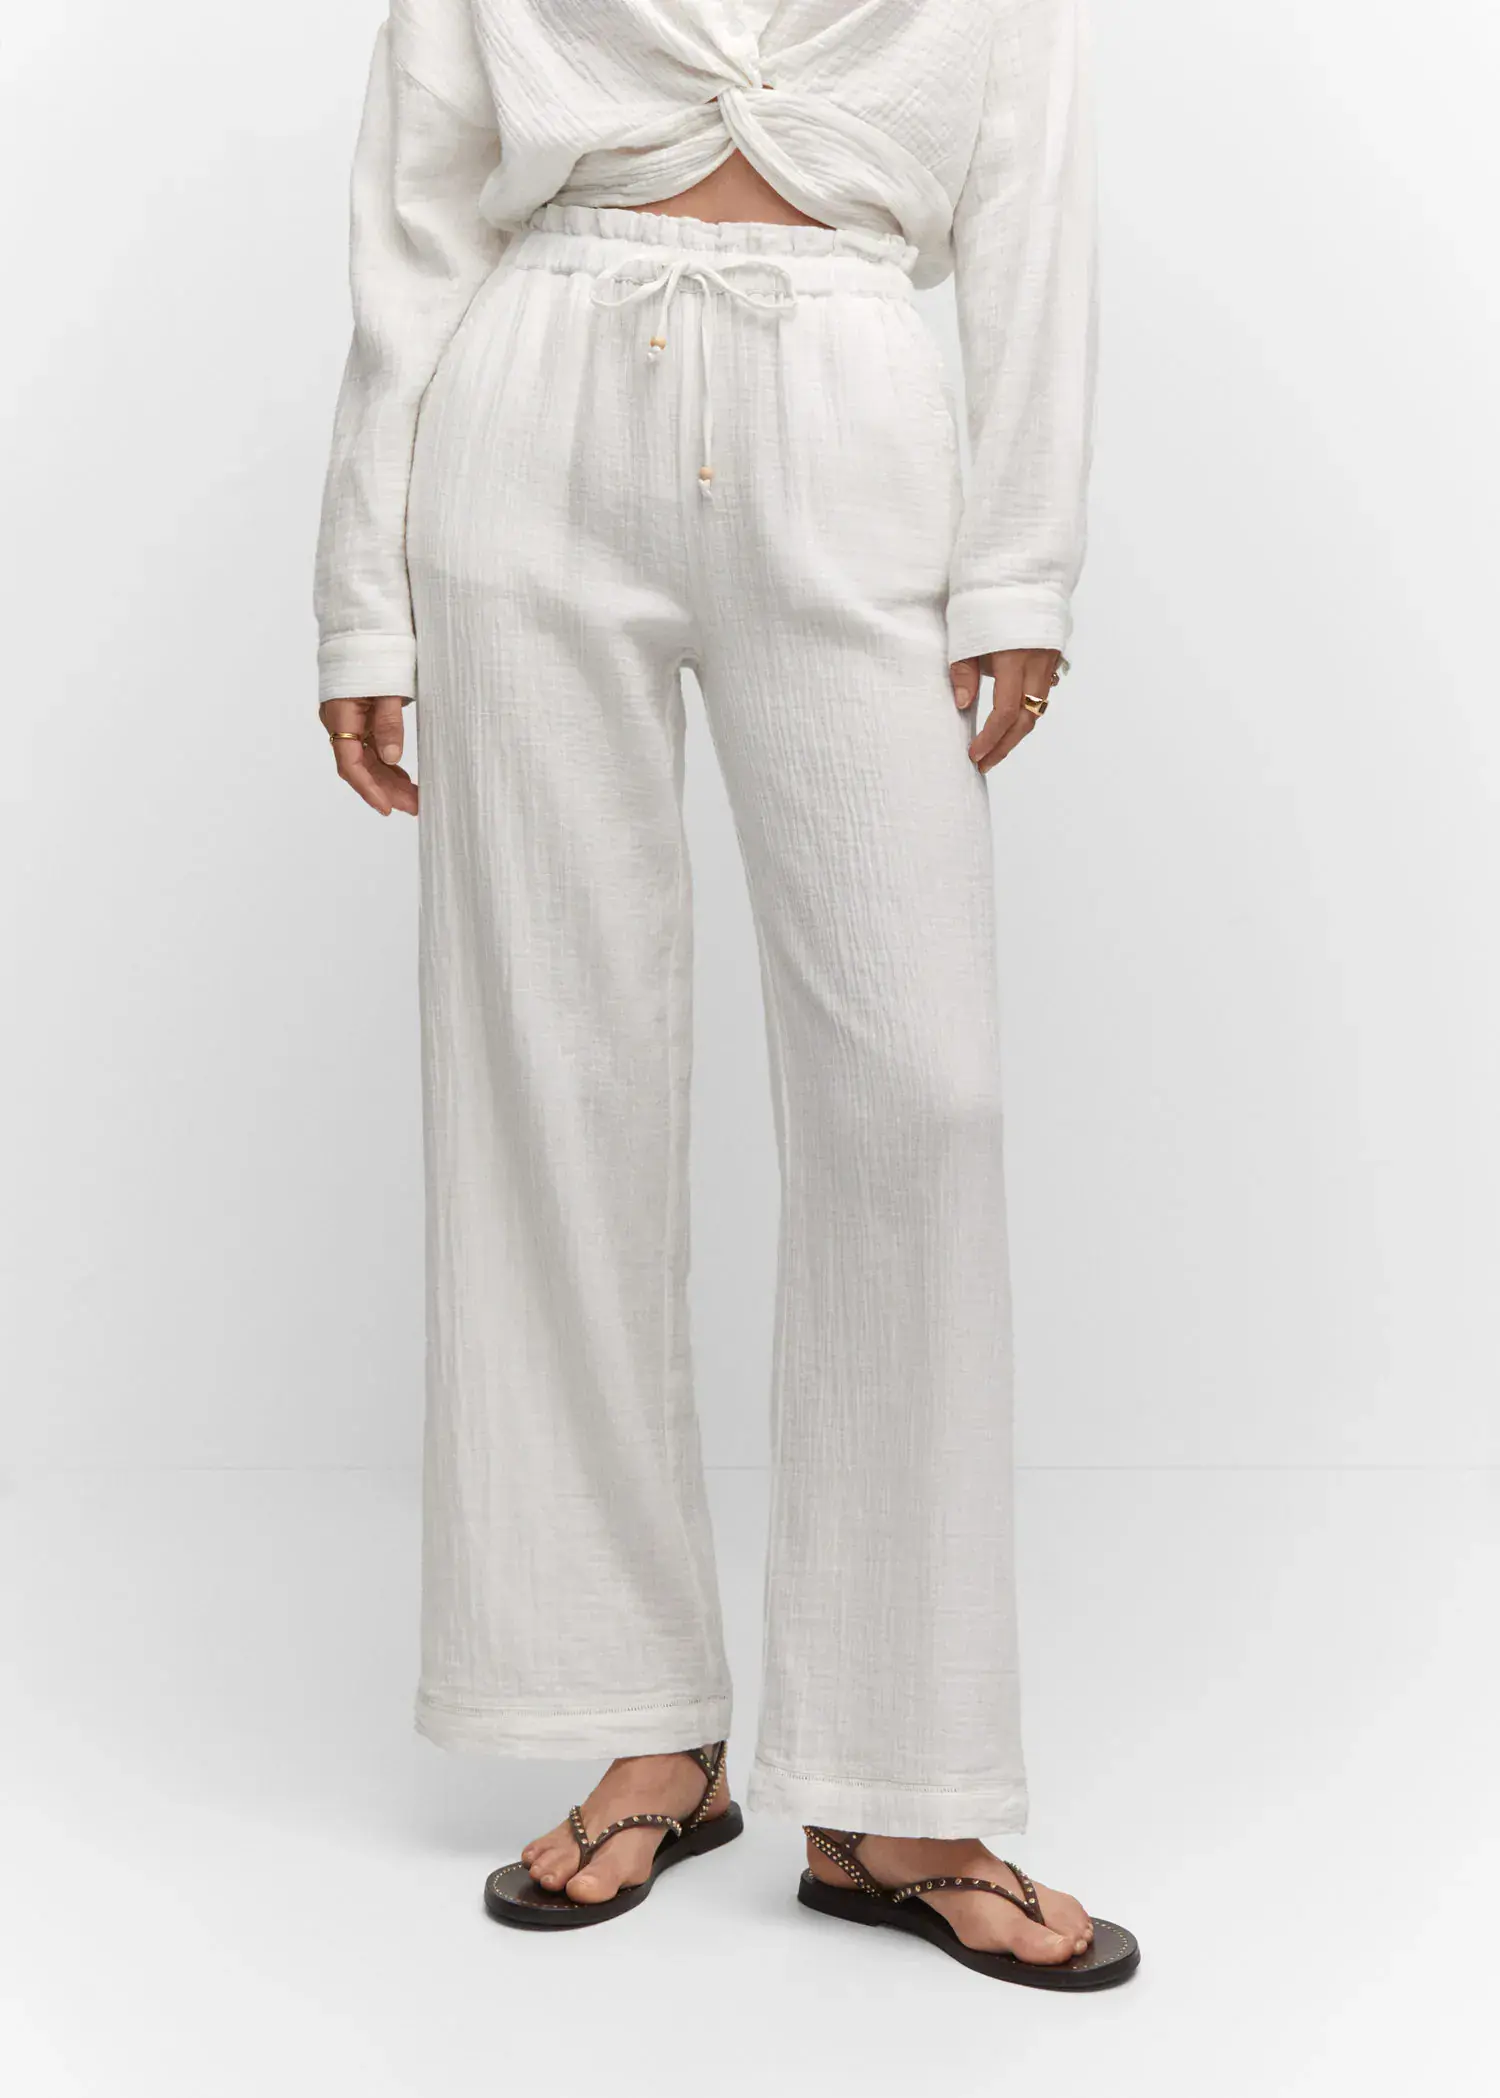 Mango Bow textured trousers. a person wearing white pants and a white shirt. 